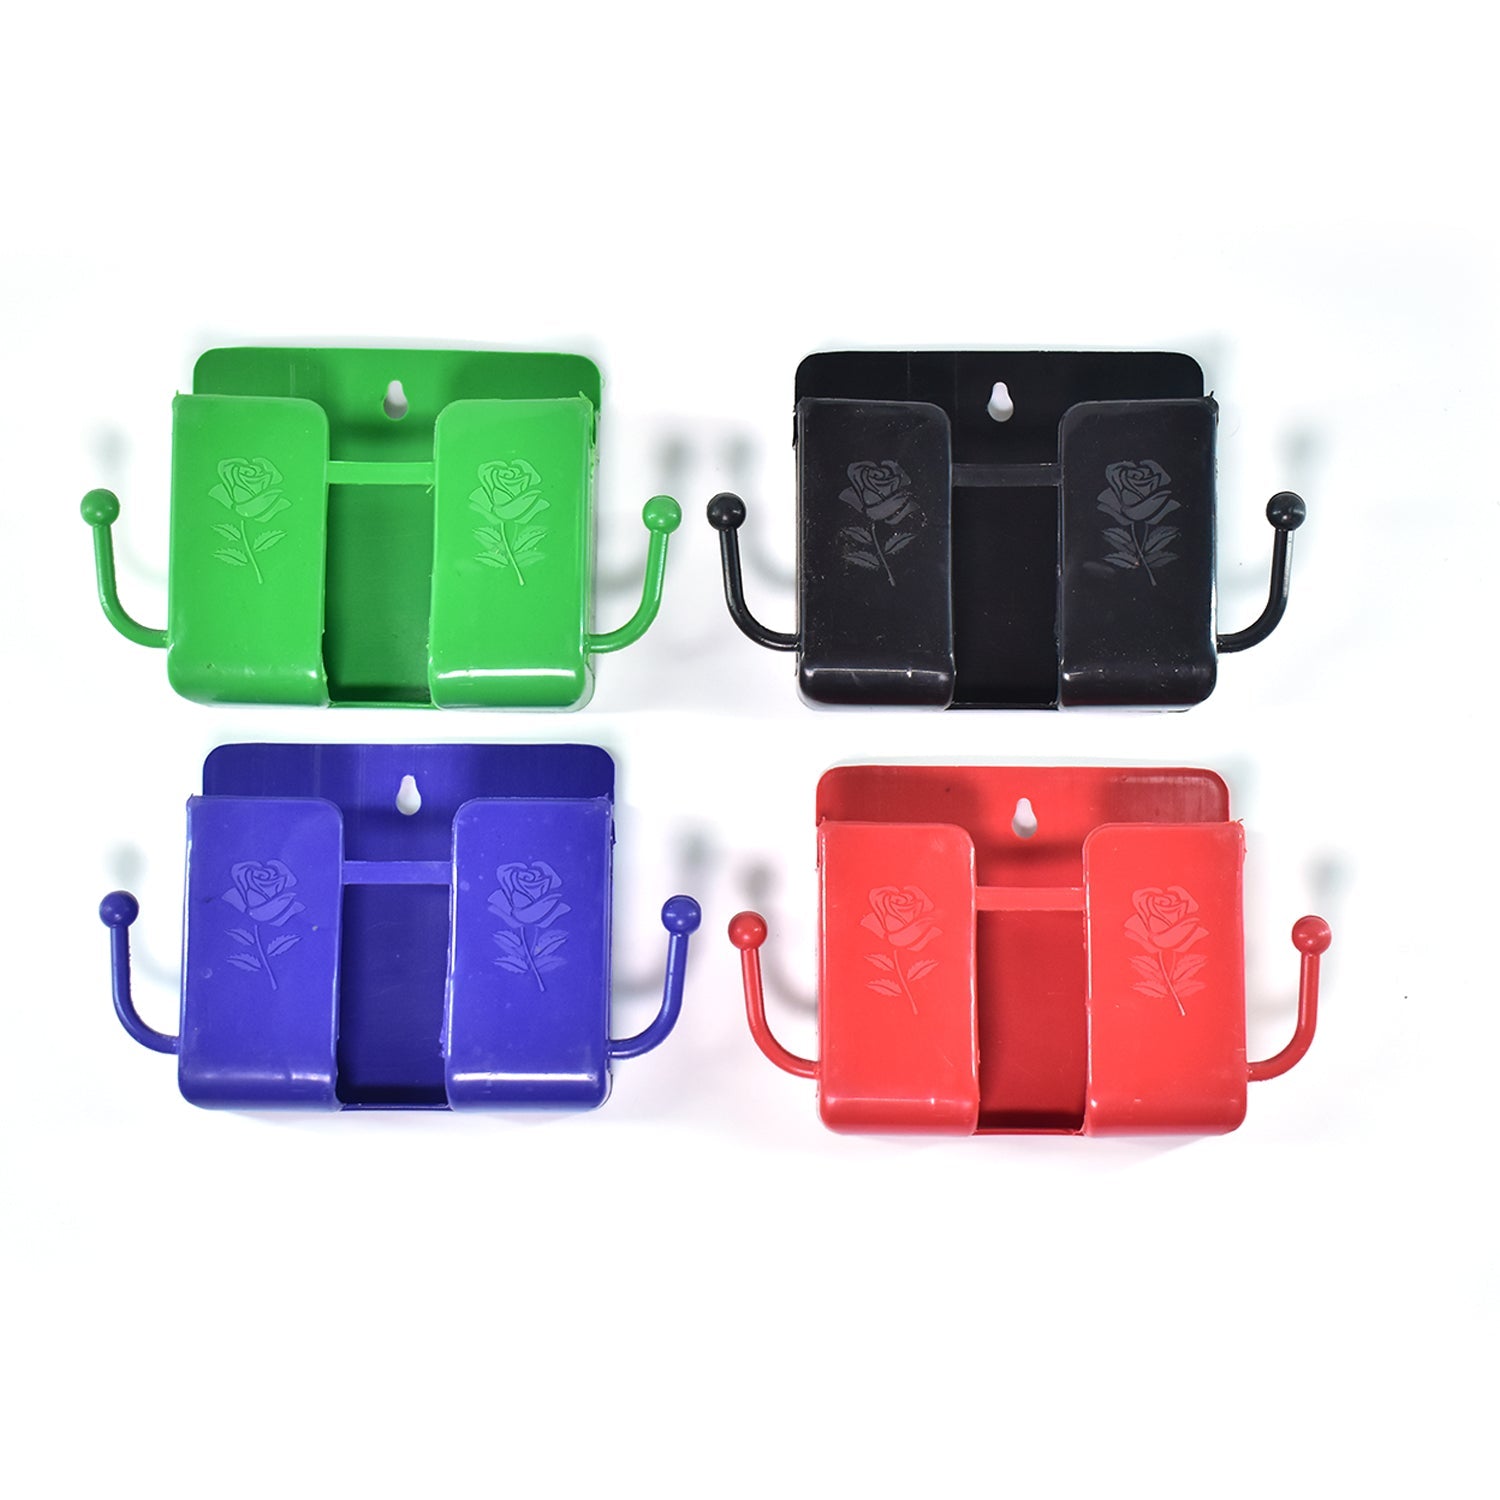 6201A Wall Mounted Storage Box/Remote Storage Organizer Case with 2 Side Hanging Hooks.